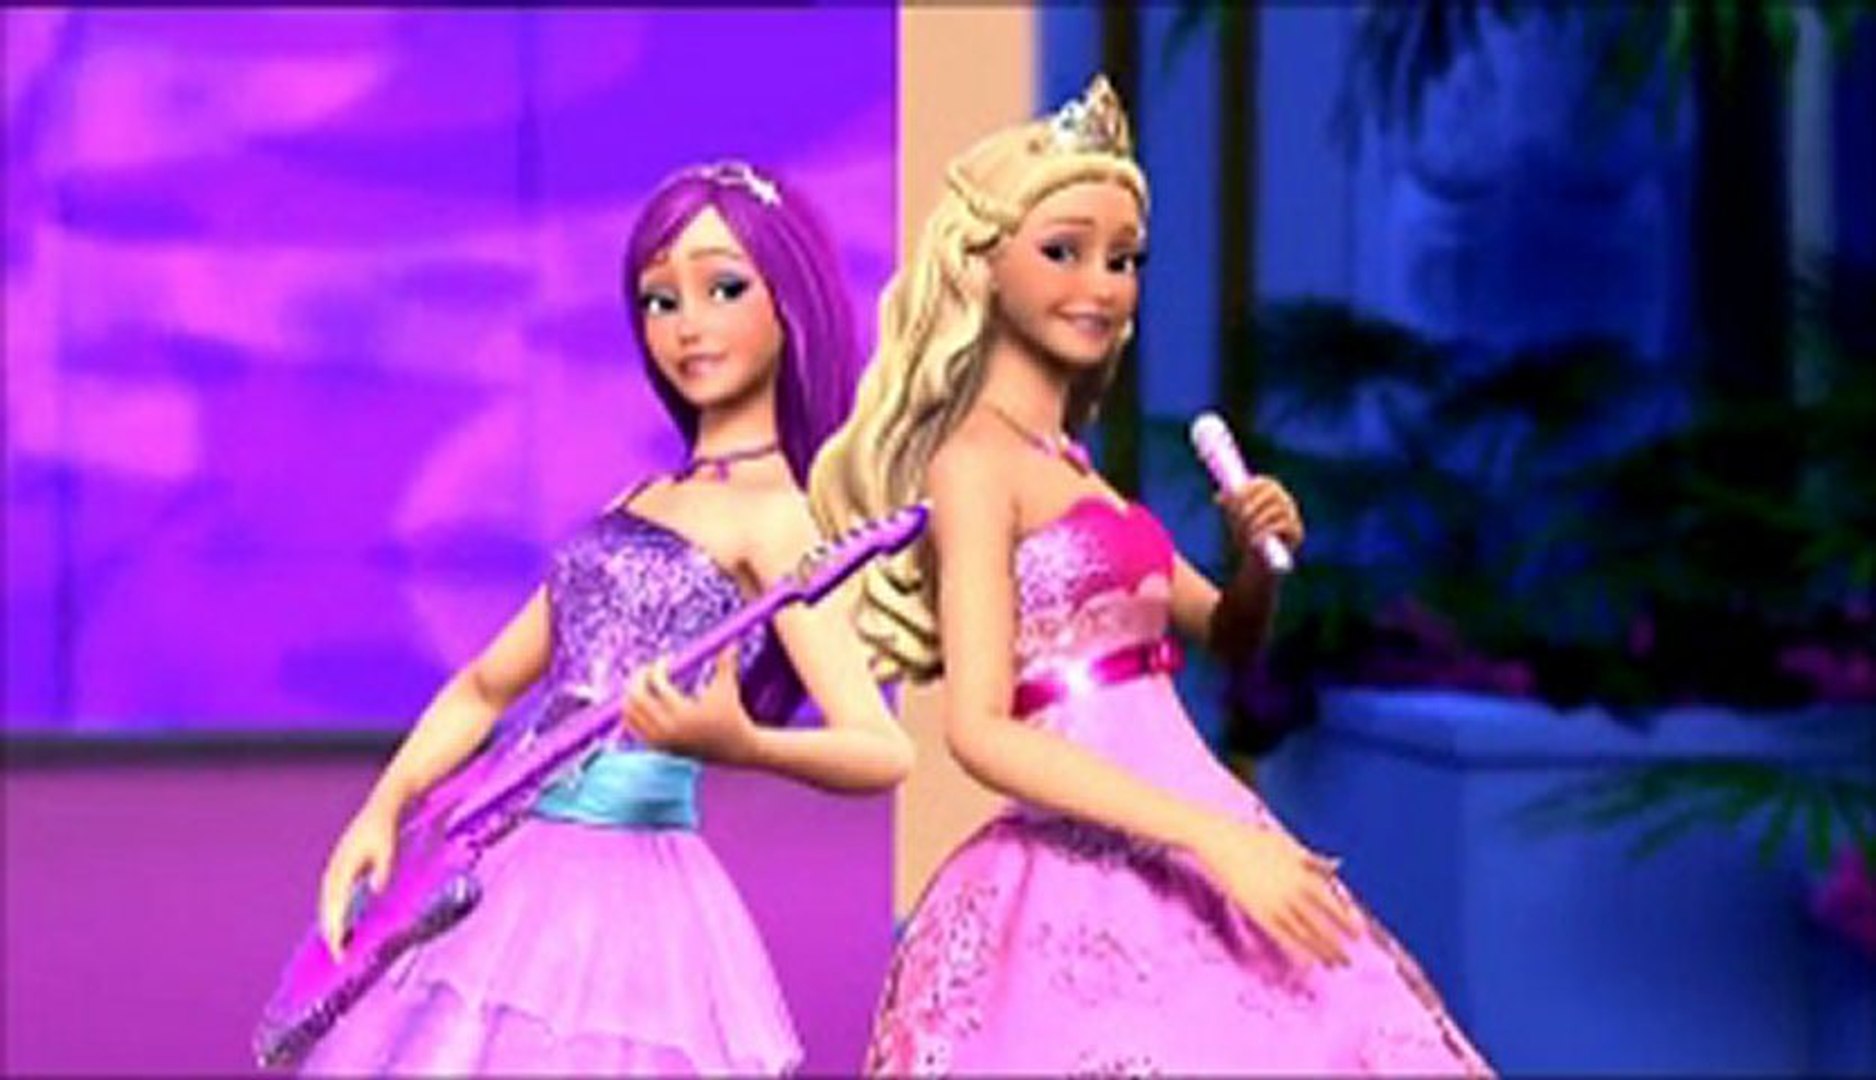 Barbie The Princess and The Popstar (201 2) watch online  www.hdmoviespool.com - Dailymotion Video